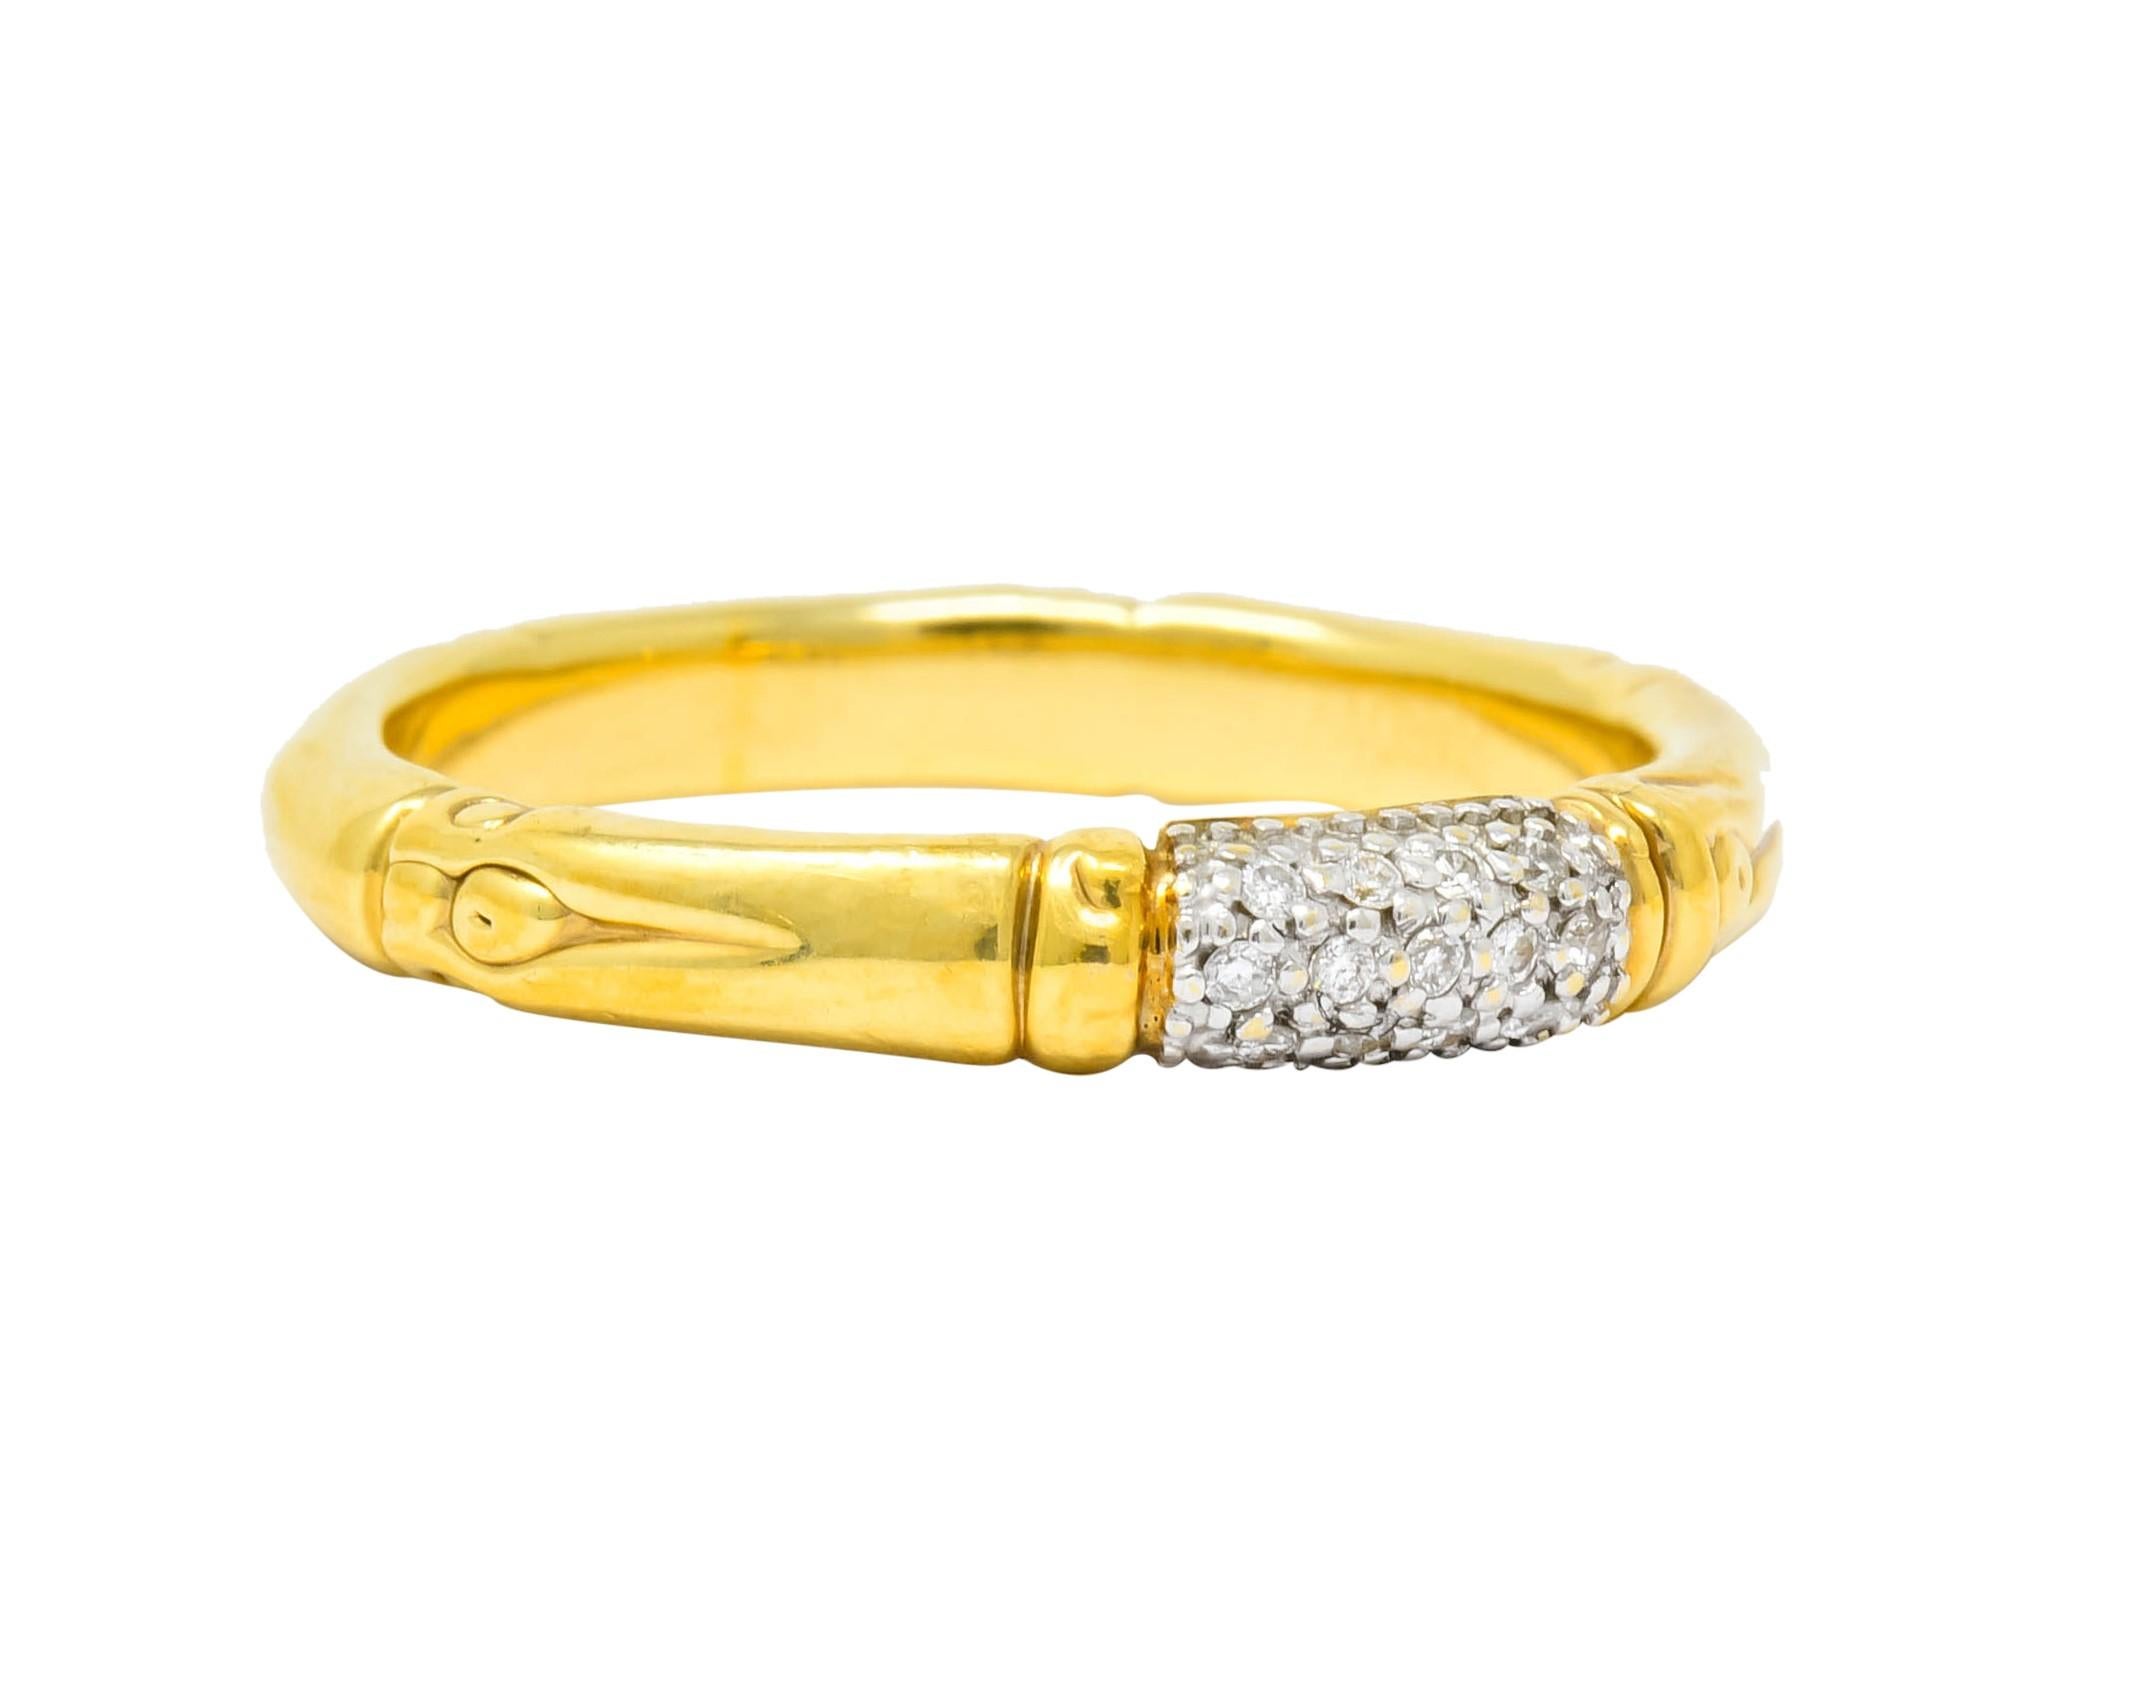 Yellow gold band ring designed with segmented bamboo motif throughout

Set to front with round brilliant cut diamonds, pavé set in a white gold, weighing approximately 0.13 carat total, eye-clean and white

From John Hardy's contemporary Bamboo